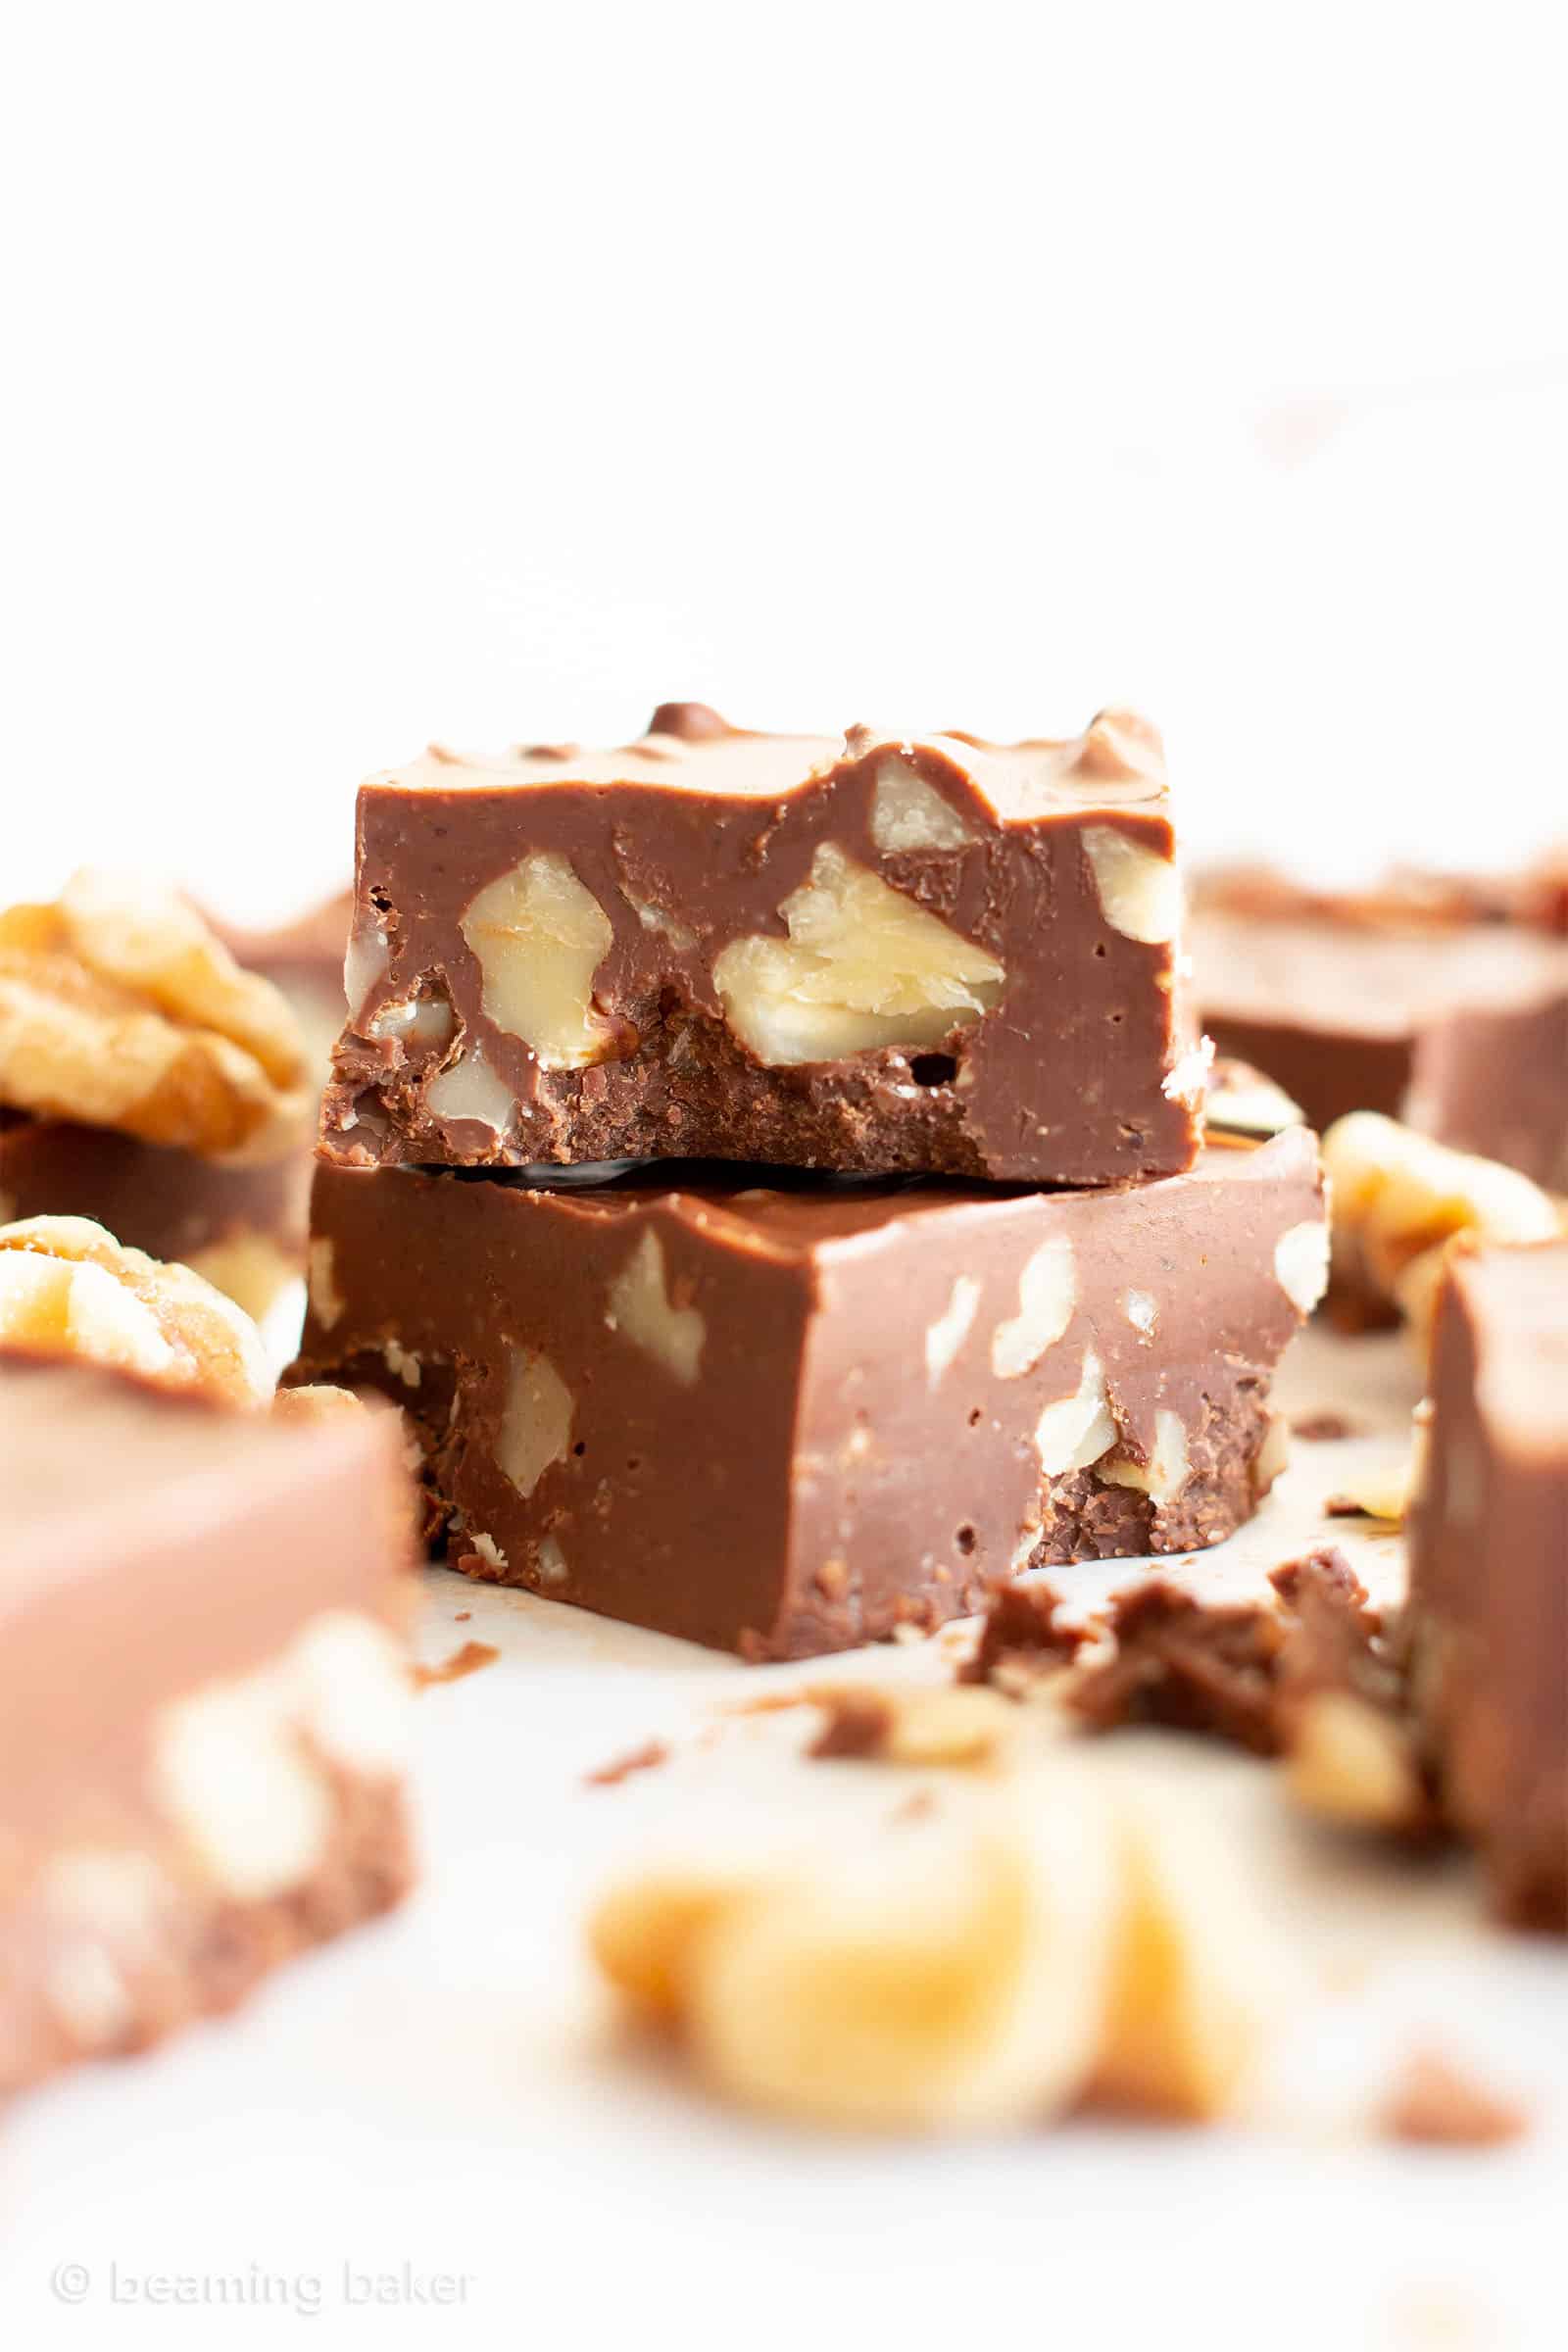 3 Ingredient Chocolate Walnut Fudge (V, GF): a 5-min recipe for thick squares of rich, velvety paleo vegan fudge packed with delicious walnuts. Made with healthy ingredients. #HealthyDesserts #Christmas #VeganGlutenFree #PaleoDesserts #VeganFudge #Fudge #BeamingBaker | Recipe at BeamingBaker.com